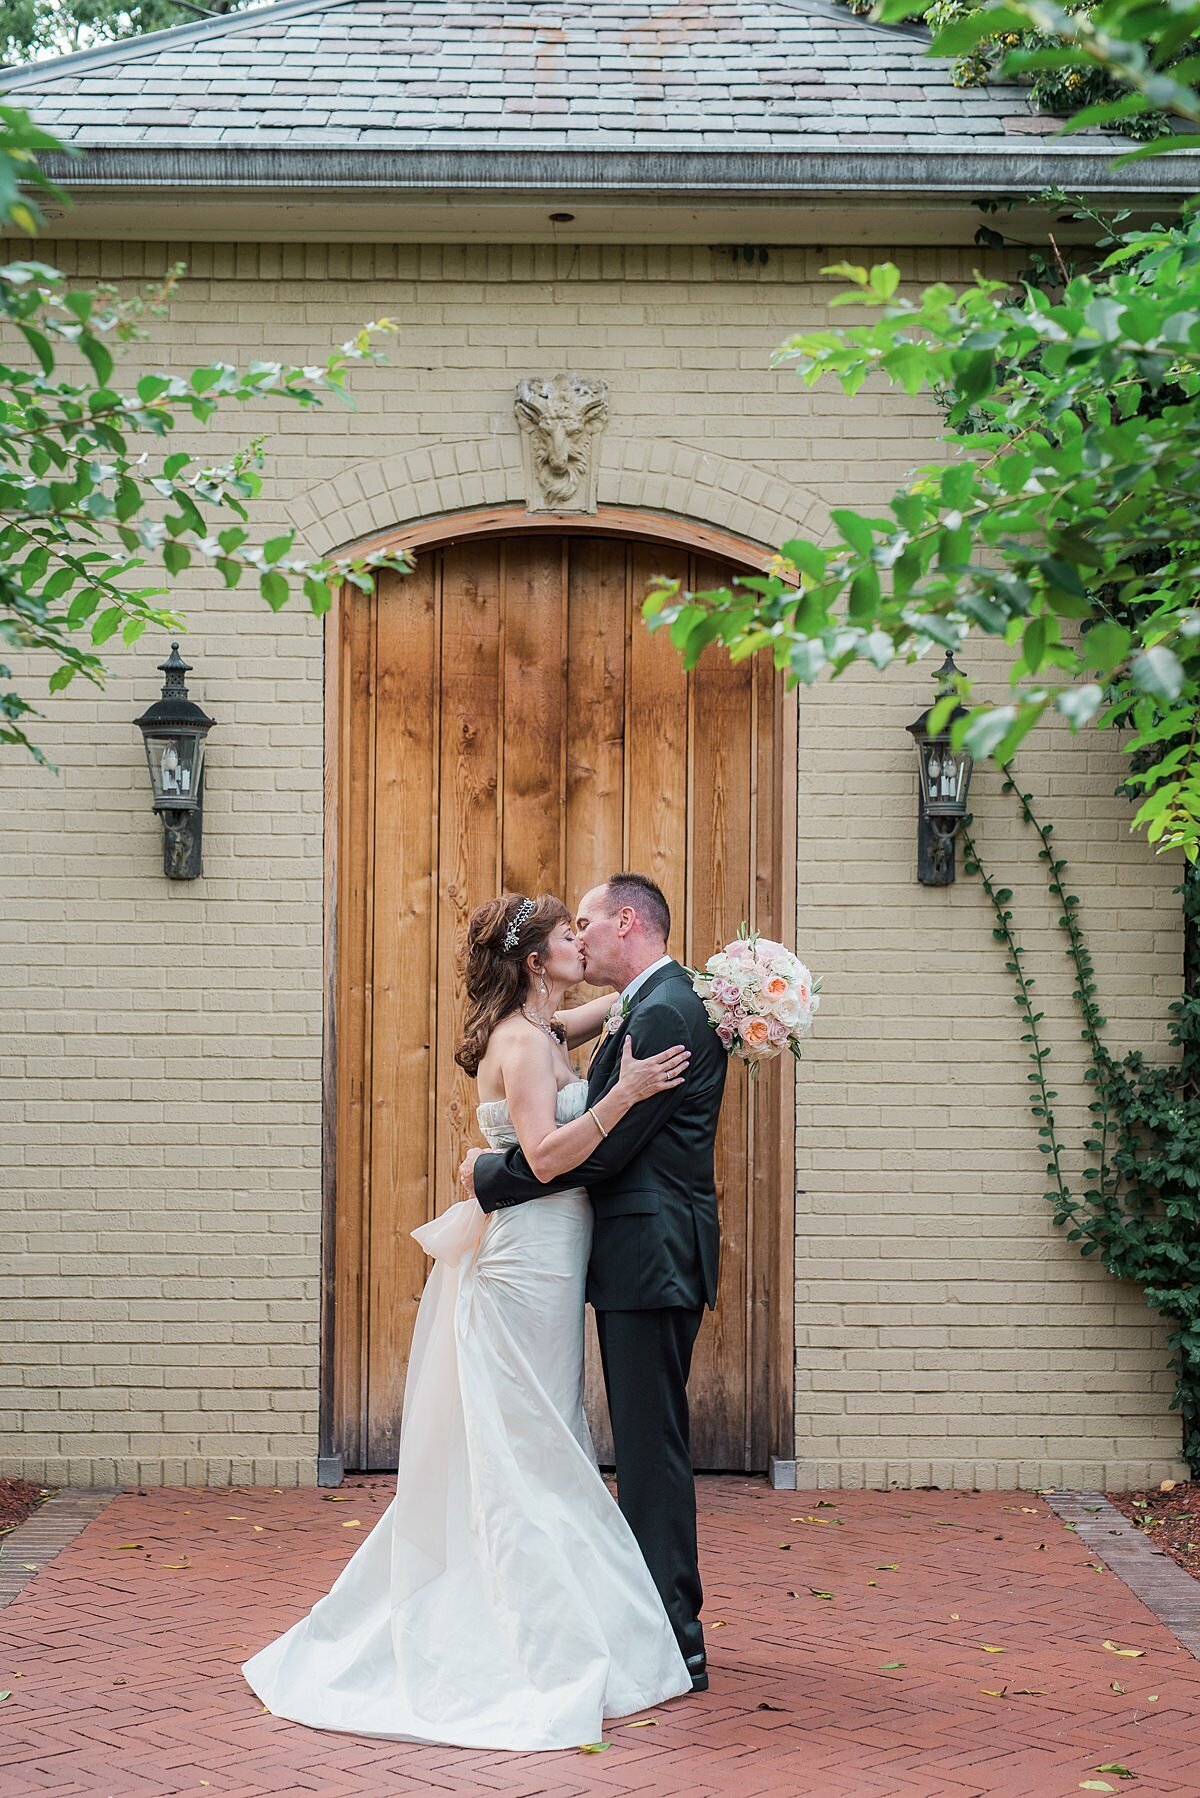 The bride, in a long satin gown and tiara kisses the groom in a dark gray suit at East Ivy Mansion while holding a bouquet of white and blush flowers